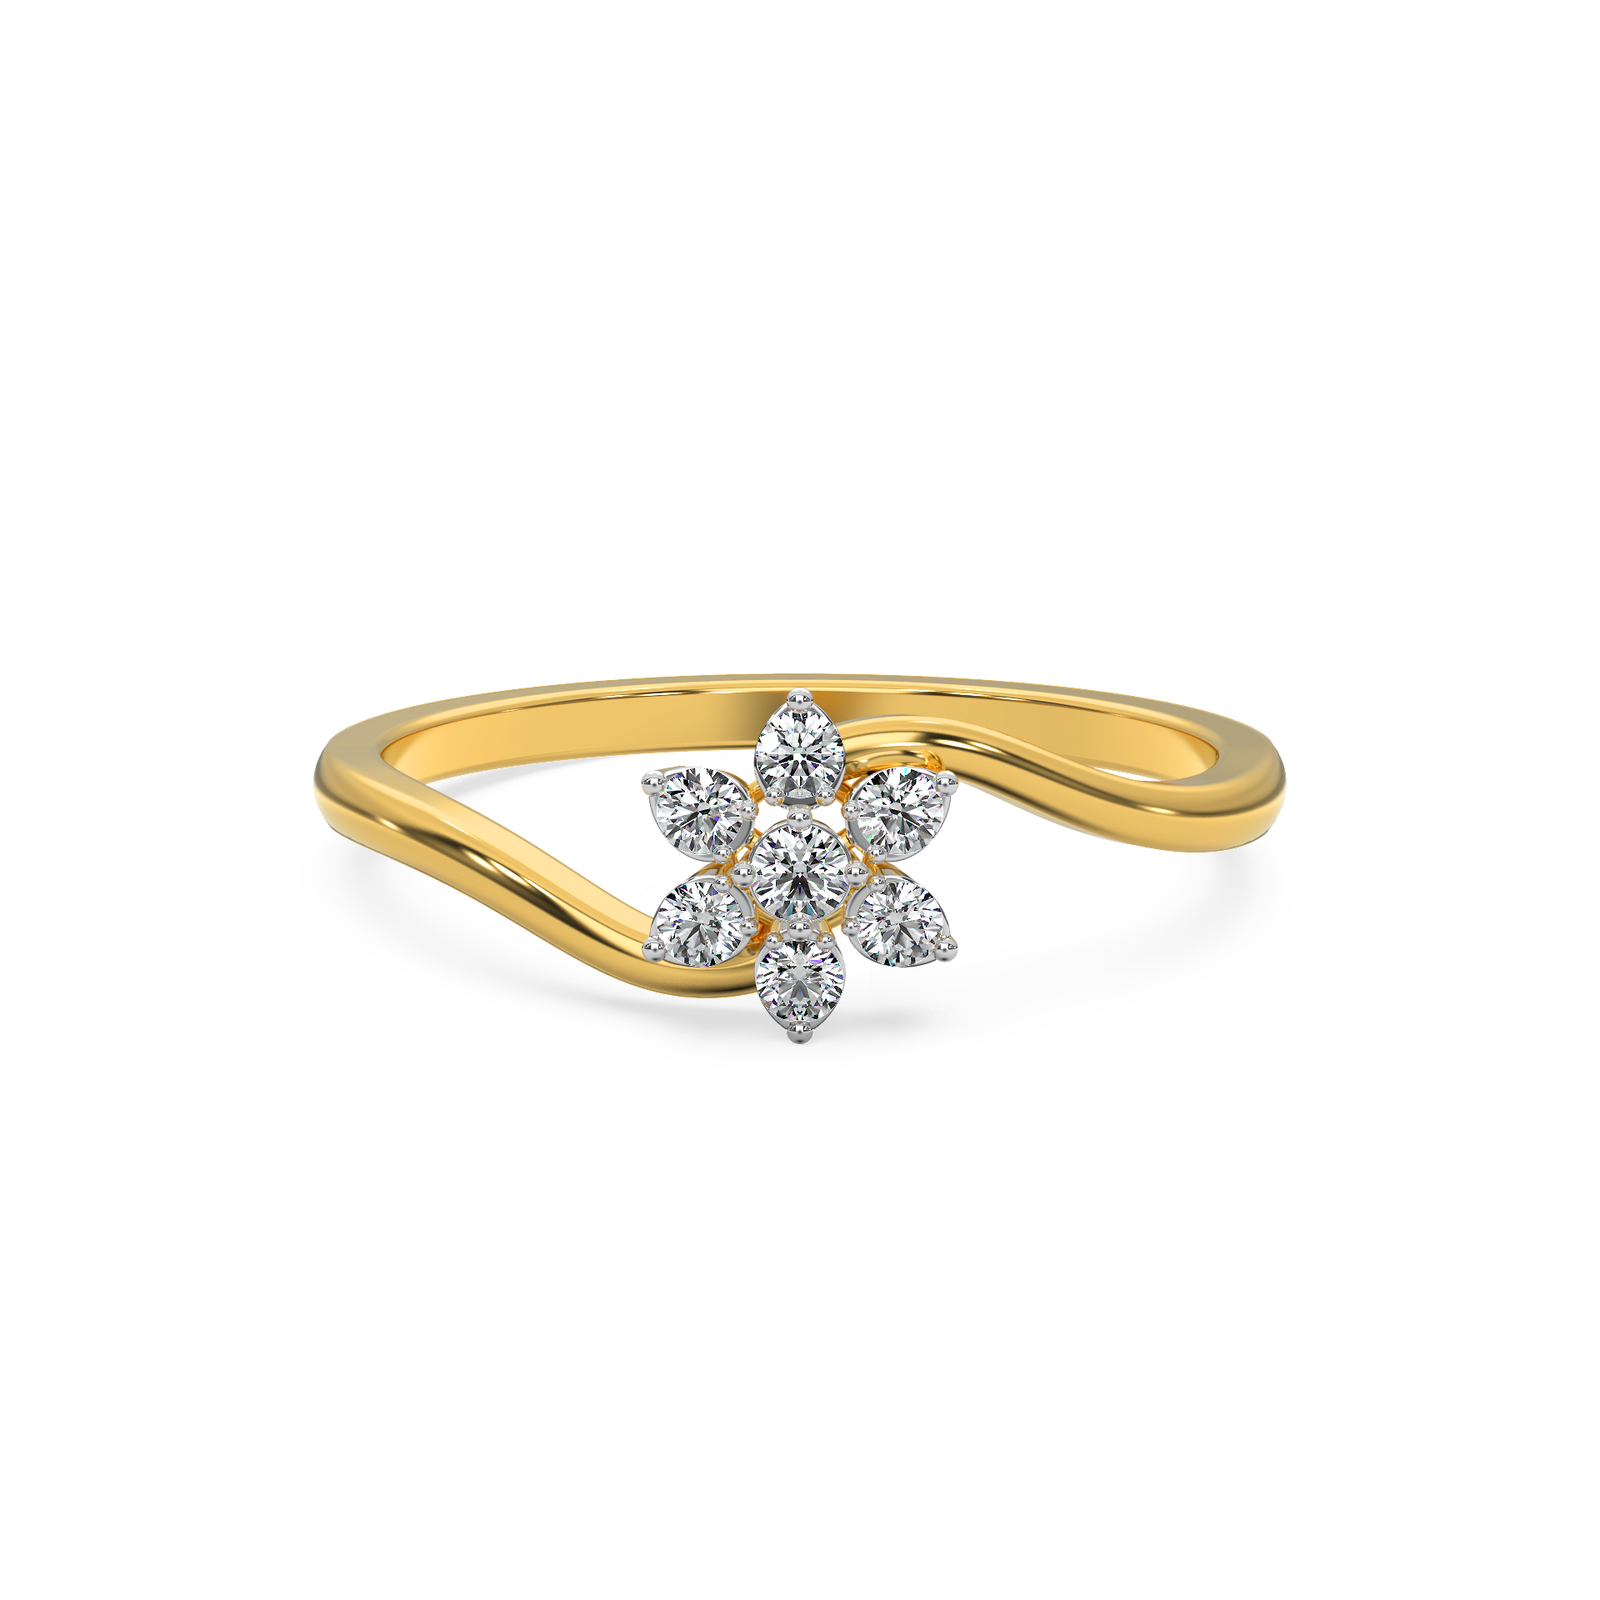 Blossom Elegance Diamond Ring in 14 KT Yellow Gold or 18 KT Yellow Gold. engagement rings for women. diamond ring price. solitaire diamond ring